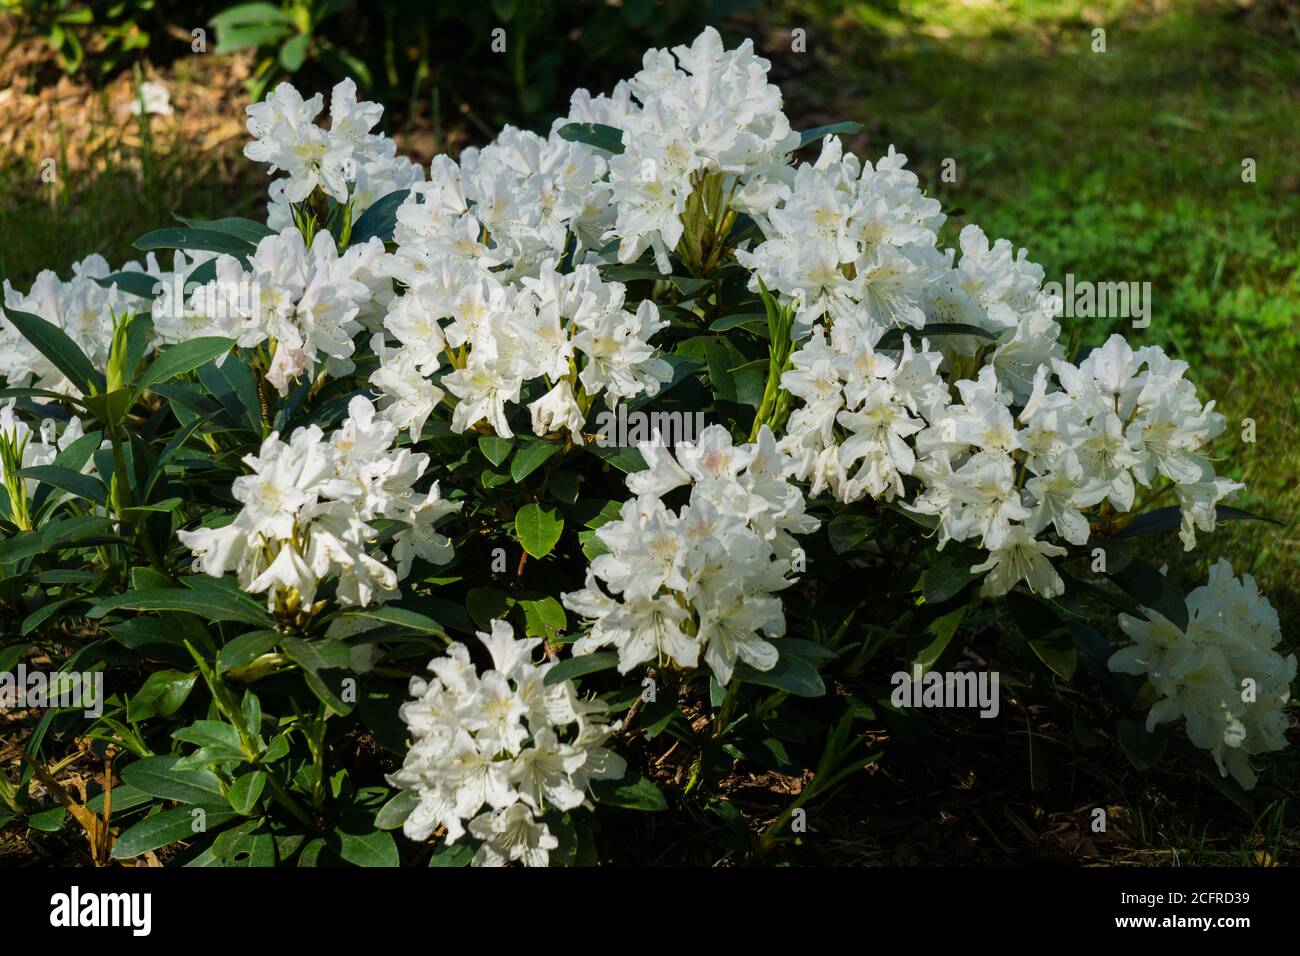 Beautiful bushes of blooming white rhododendron flowers in a city park. Stock Photo